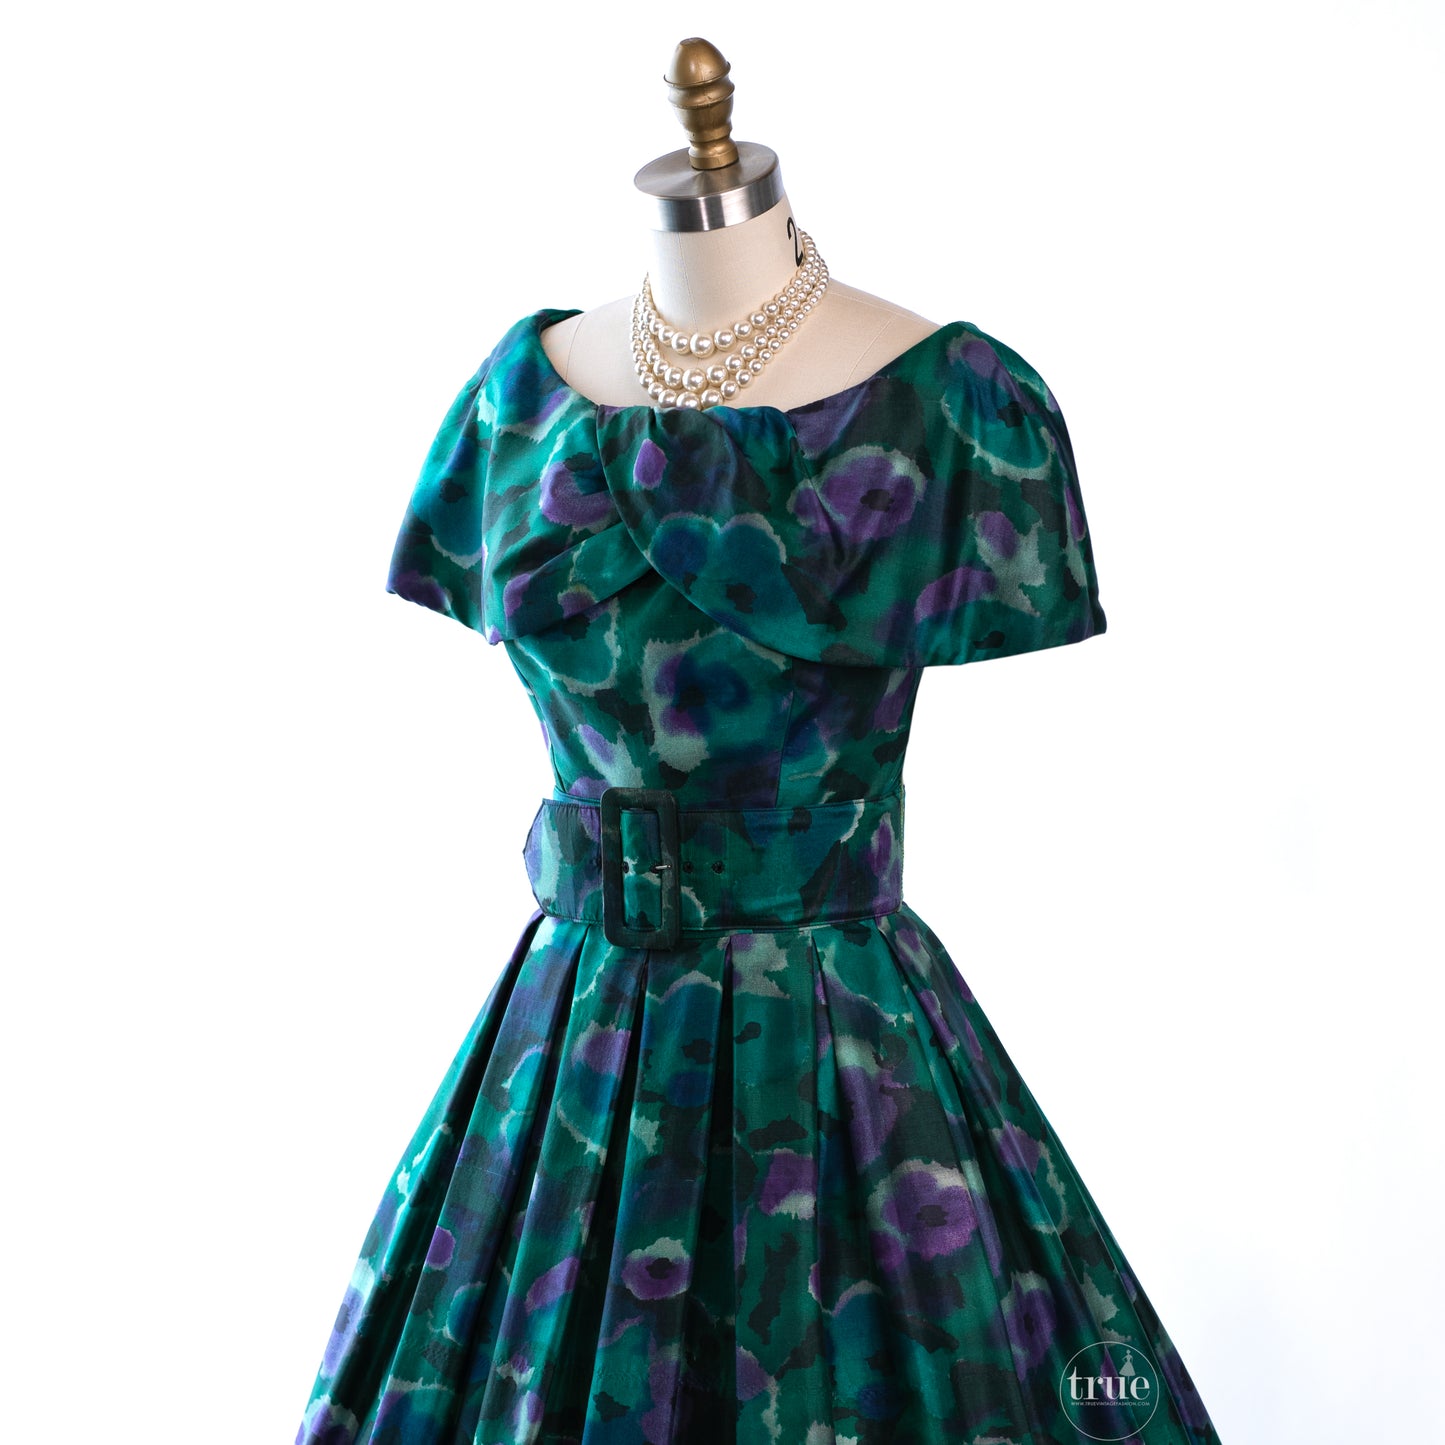 vintage 1950's dress ...dior inspired GIGI YOUNG NEW YORK silk shantung watercolor floral full skirt cocktail party dress